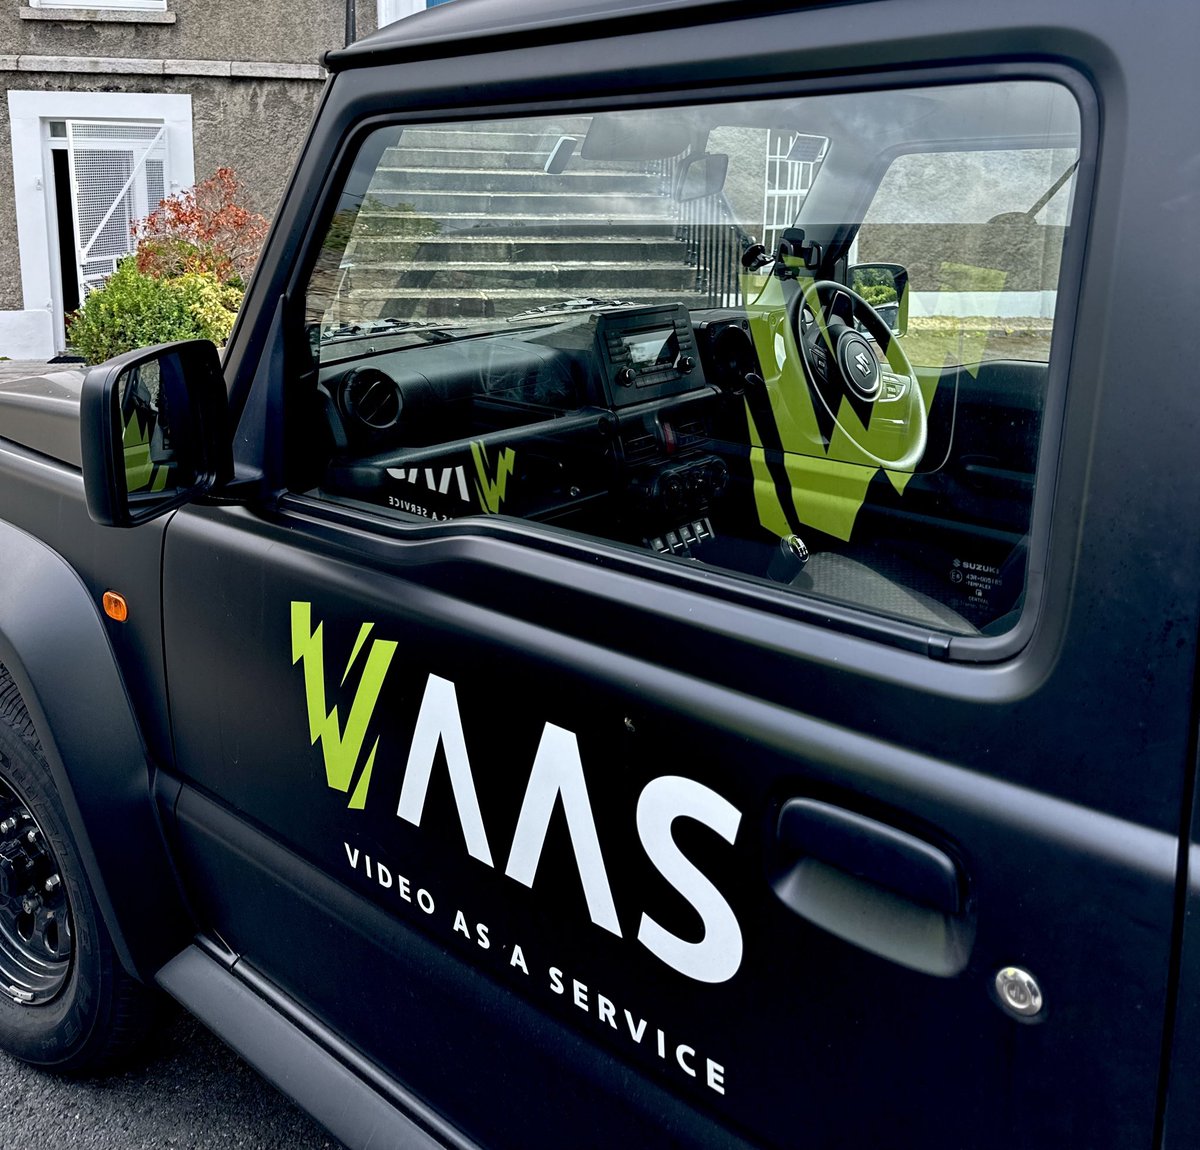 Some day for the ducks today, but we’re out and about, telling some brilliant stories and wondering, have you spotted our VAAS Vans on the road? 🎥🚘🎬

#TellYourStory #PowerYourBrand 

#videoproduction #Jimmy #suzukijimny #brandvideo #storytotell #irishstory #irishbusiness #sme